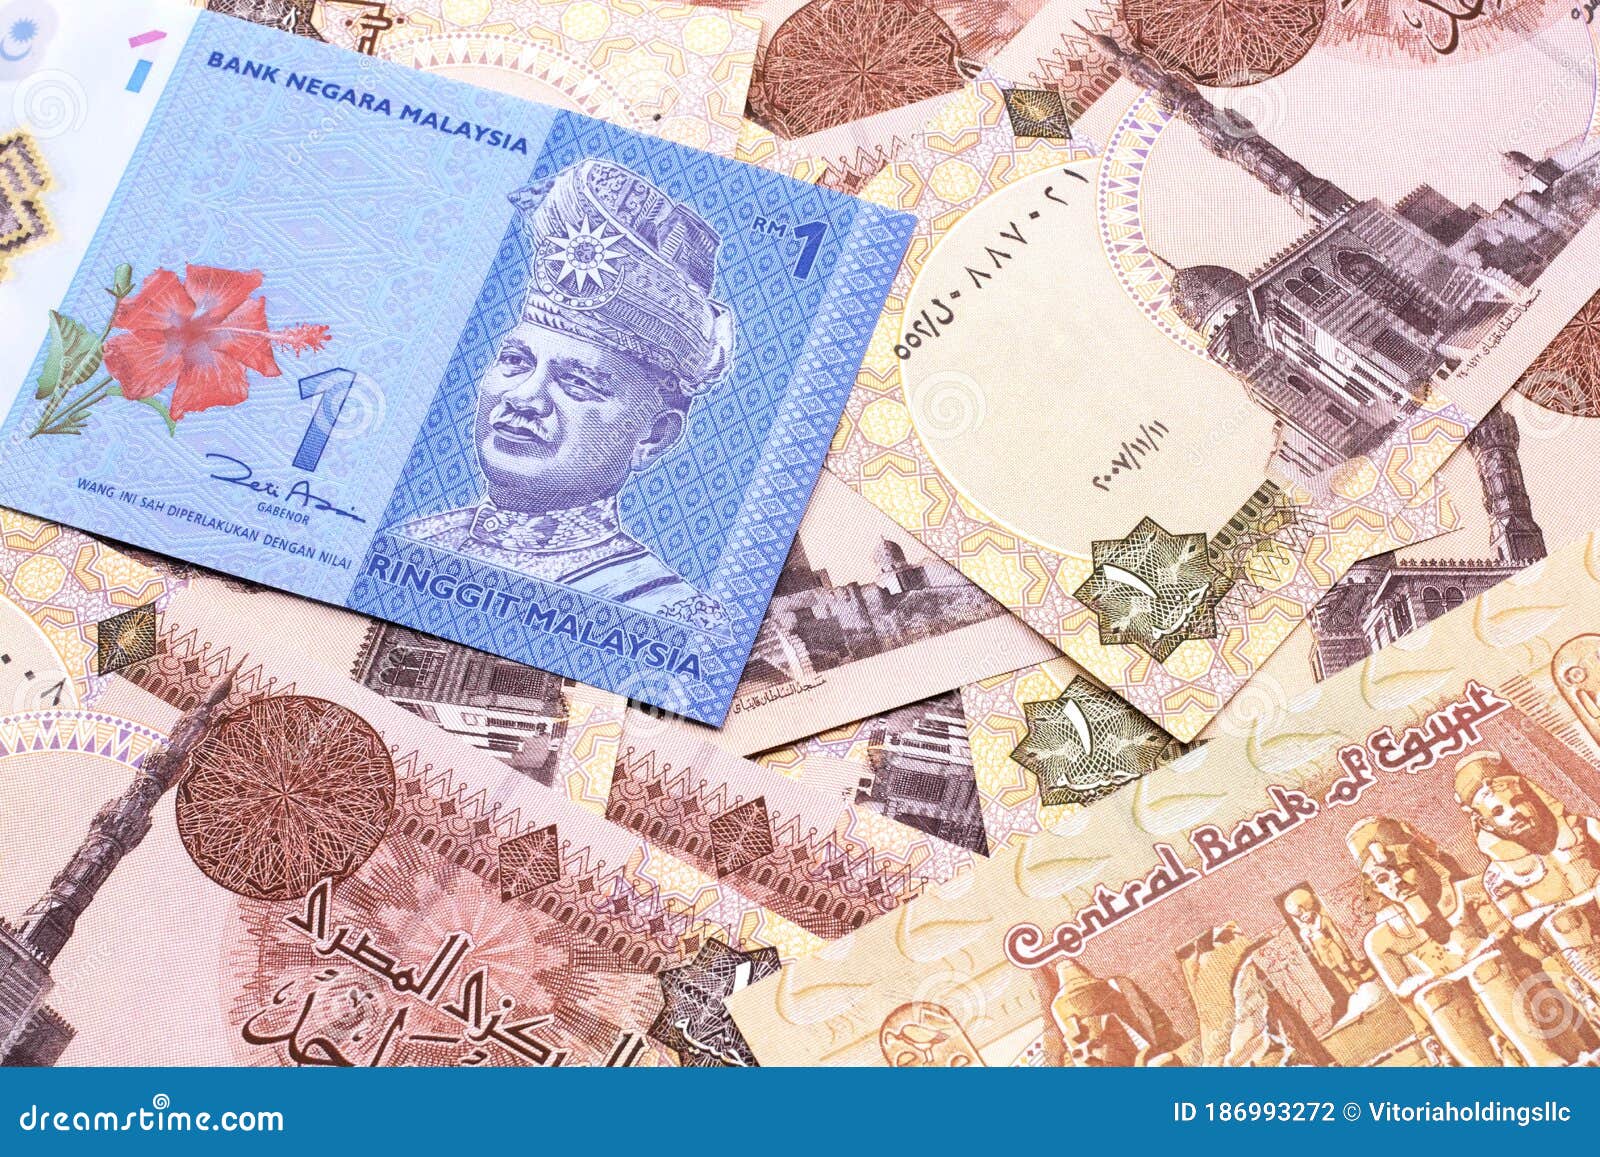 Pound To Ringgit Malaysia  Convert from 1 sterlin pound to malaysian